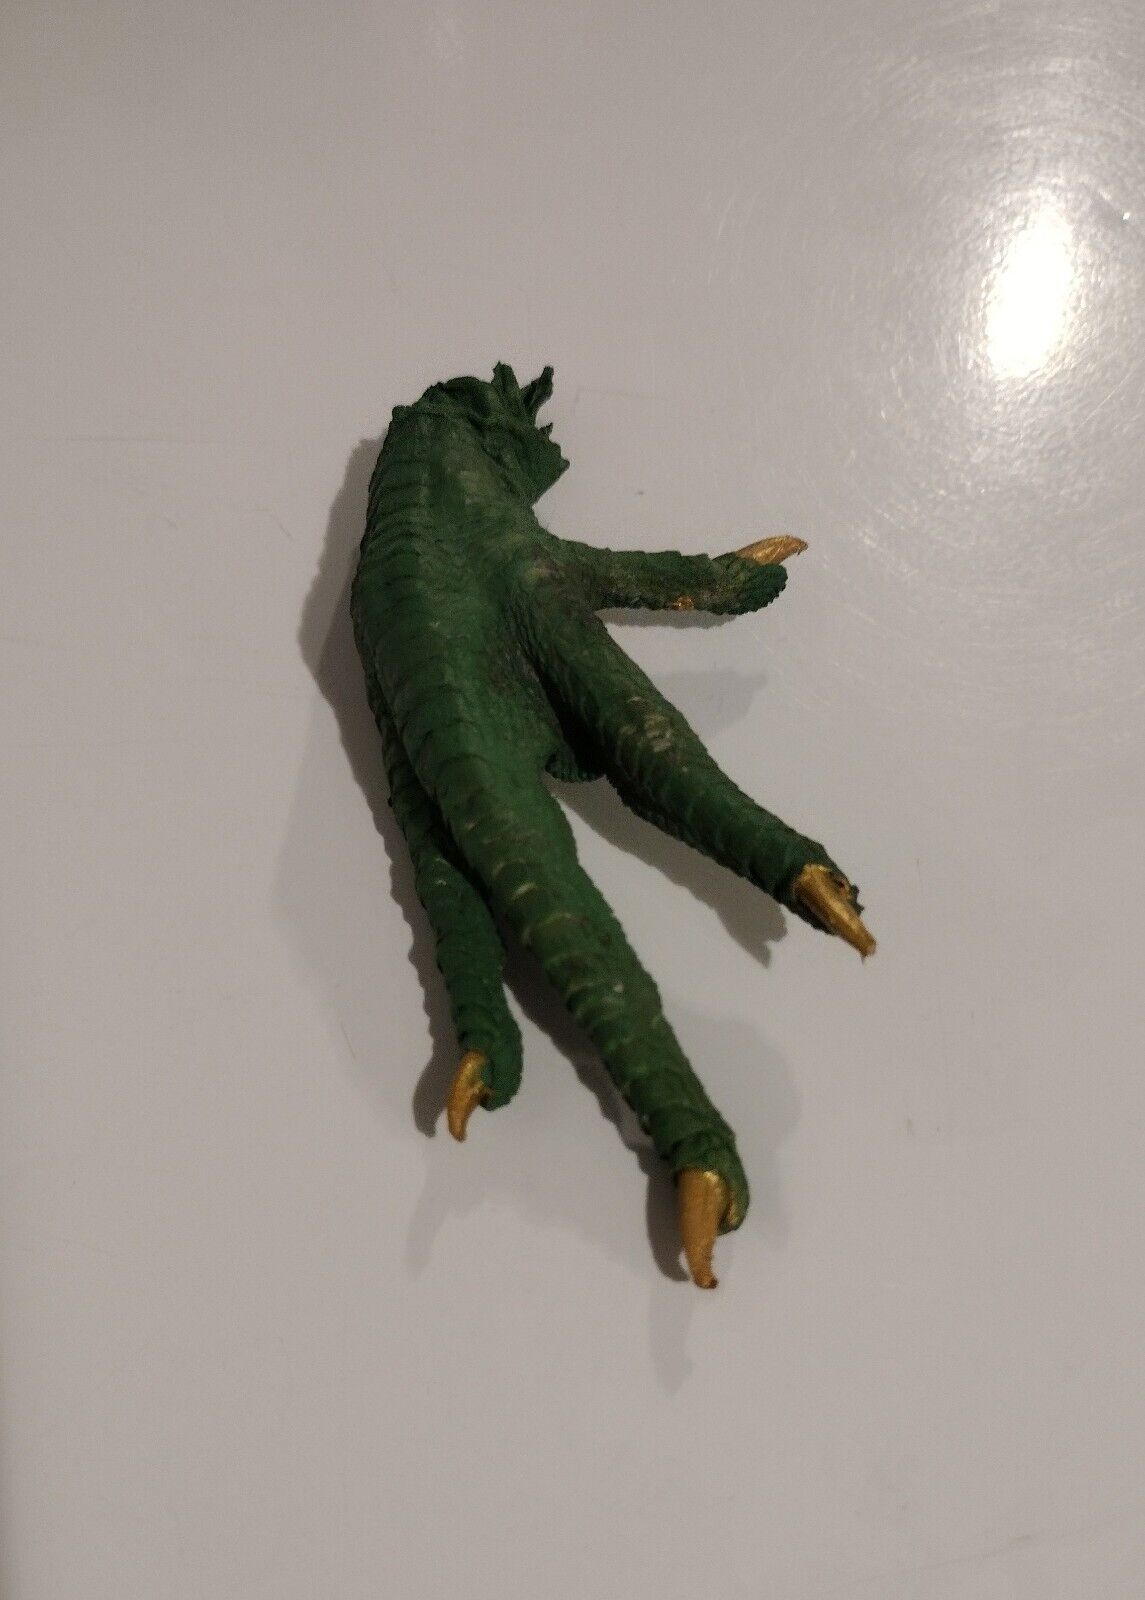 Chicken Foot Hoodoo Voodoo Spell Work Dried Green Paw With Gold Claws Conjure